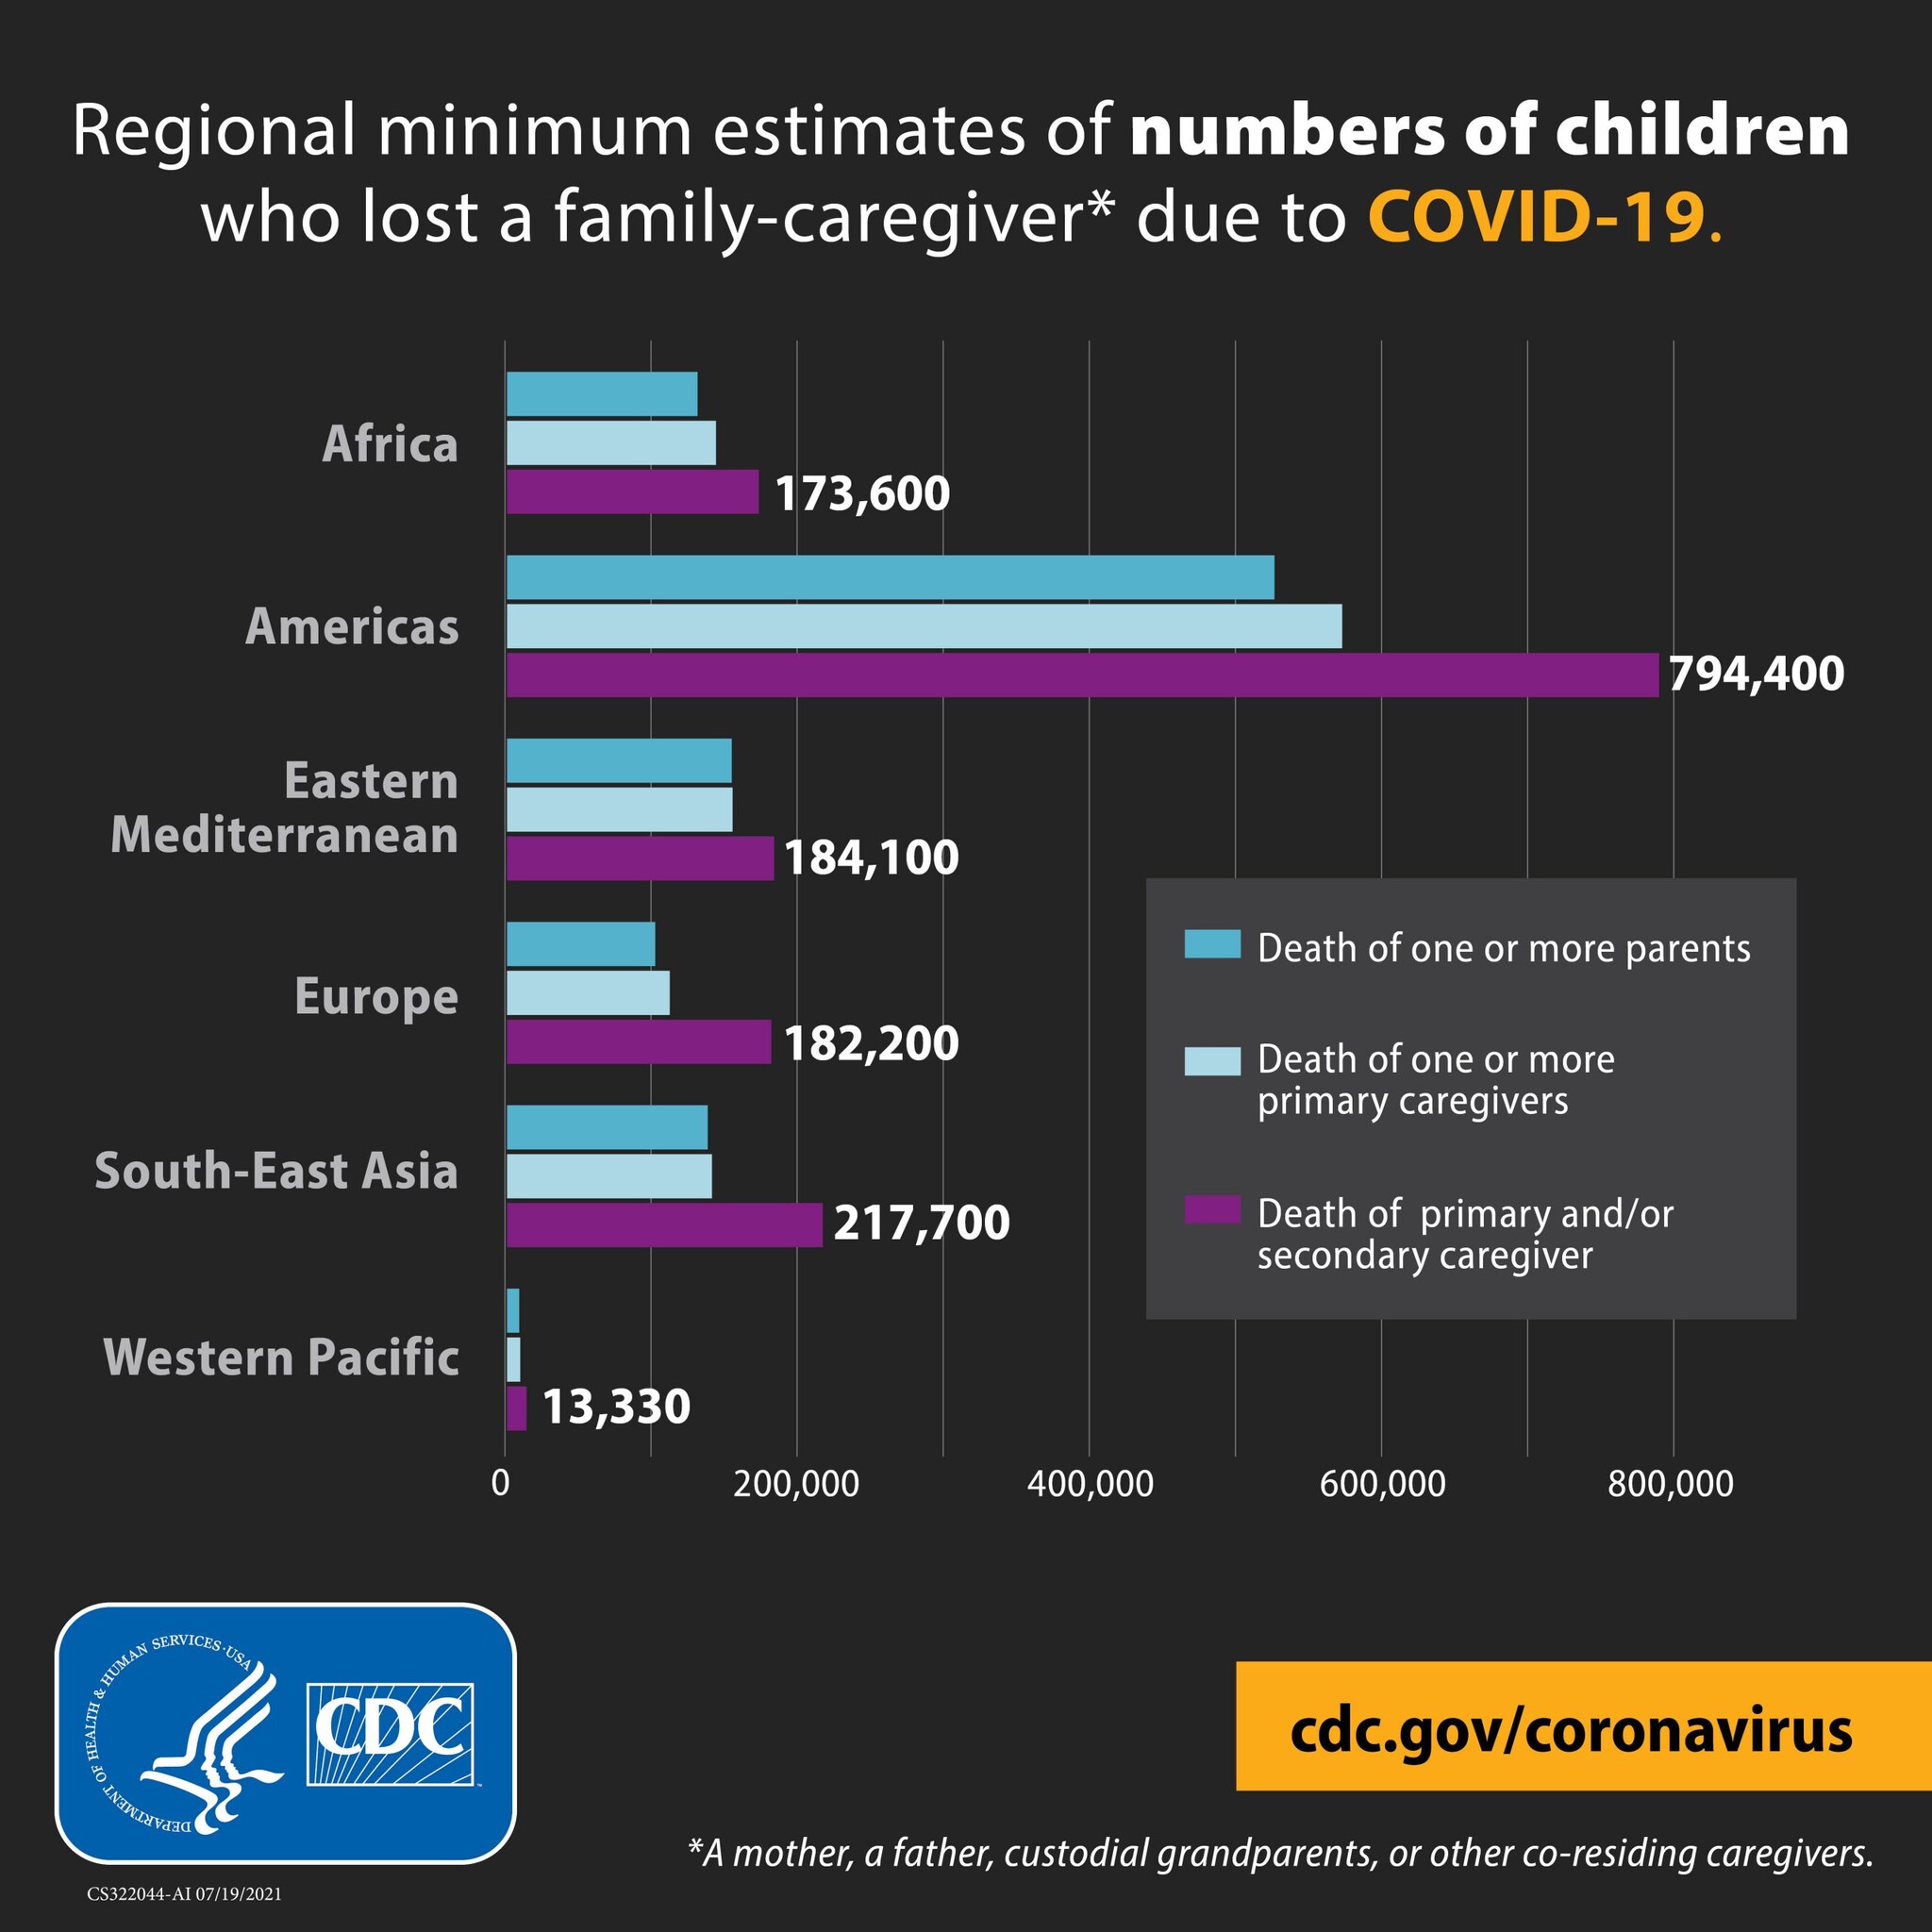 Regional minimum estimates of numbers of children who lost a family-caregiver* due to COVID-19.